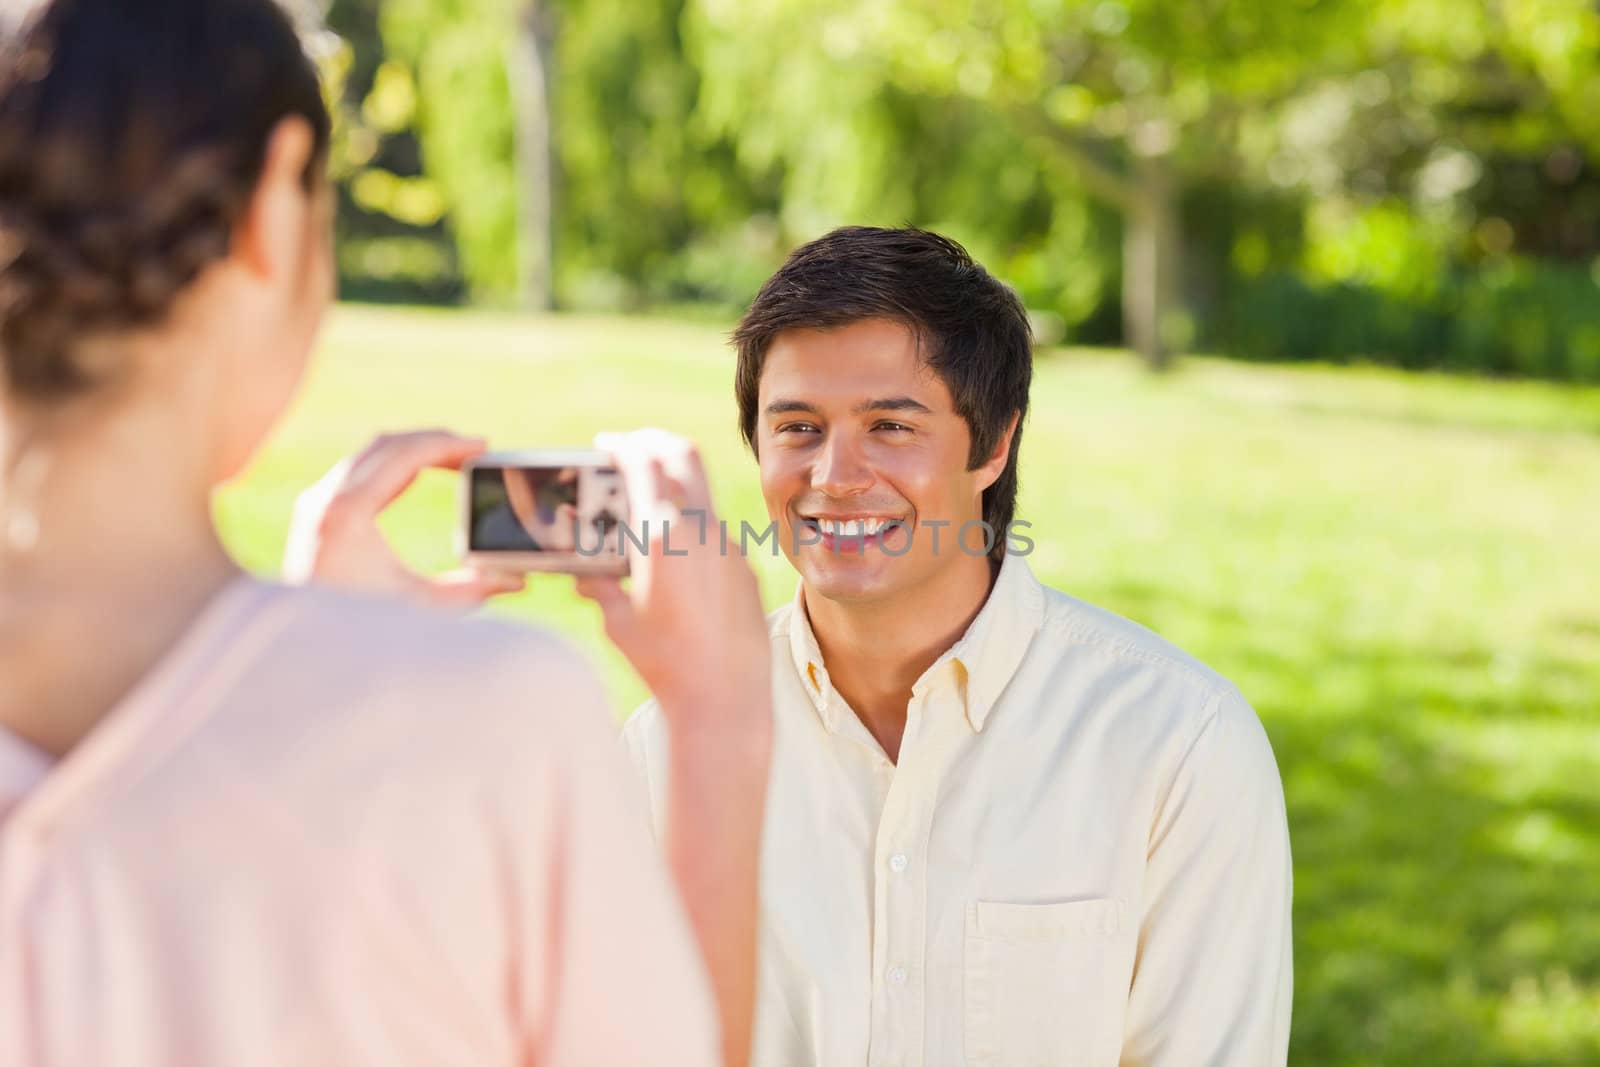 Using a camera, the woman takes a photo of her friend smiling in the park